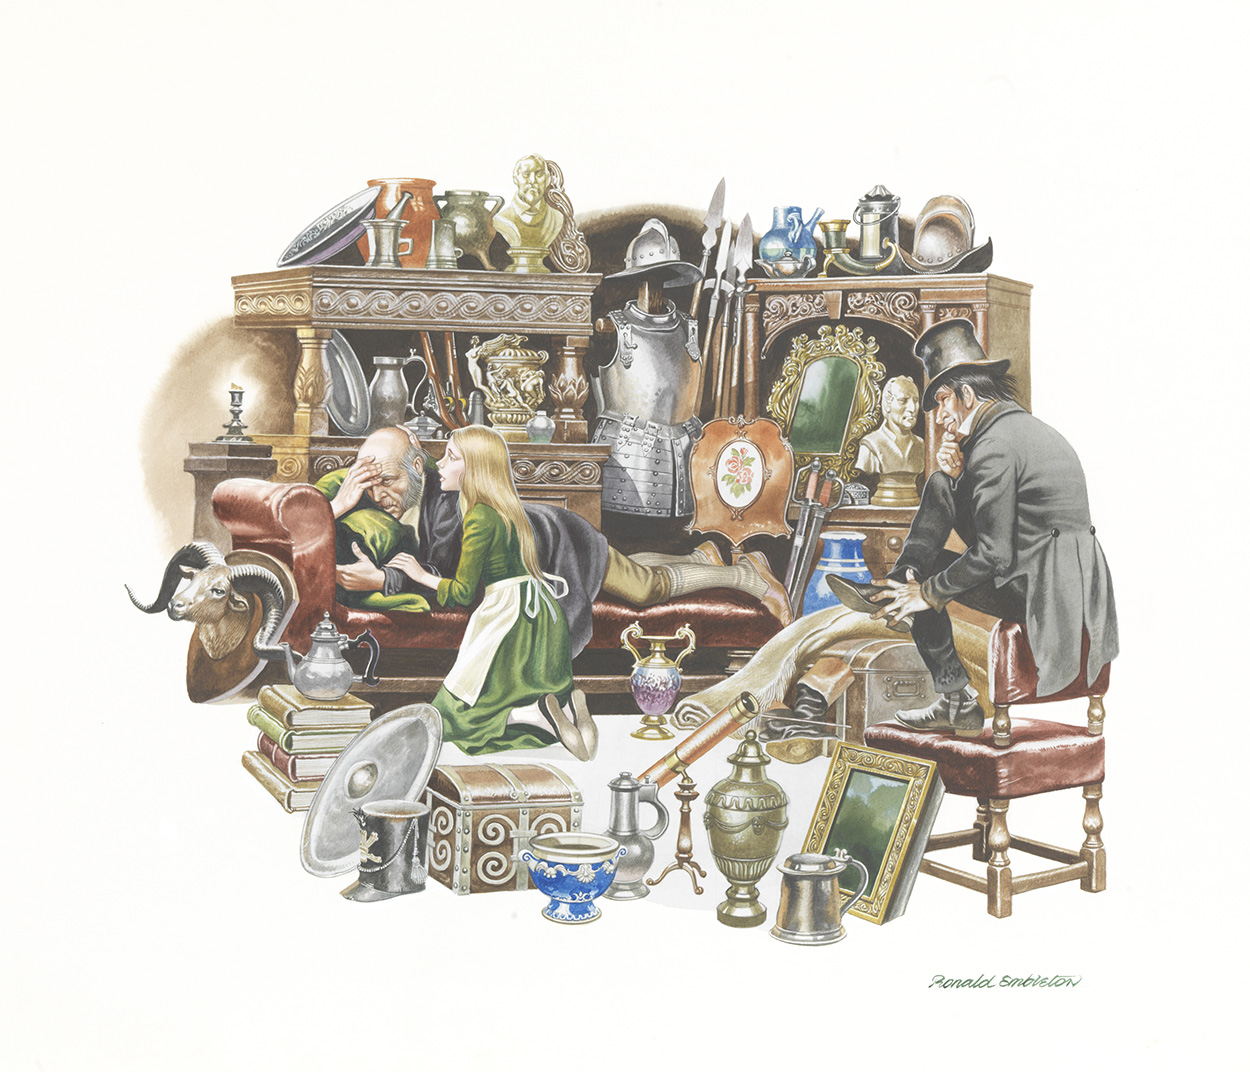 The Old Curiosity Shop: It's OK (Original) (Signed) art by Charles Dickens (Ron Embleton) at The Illustration Art Gallery